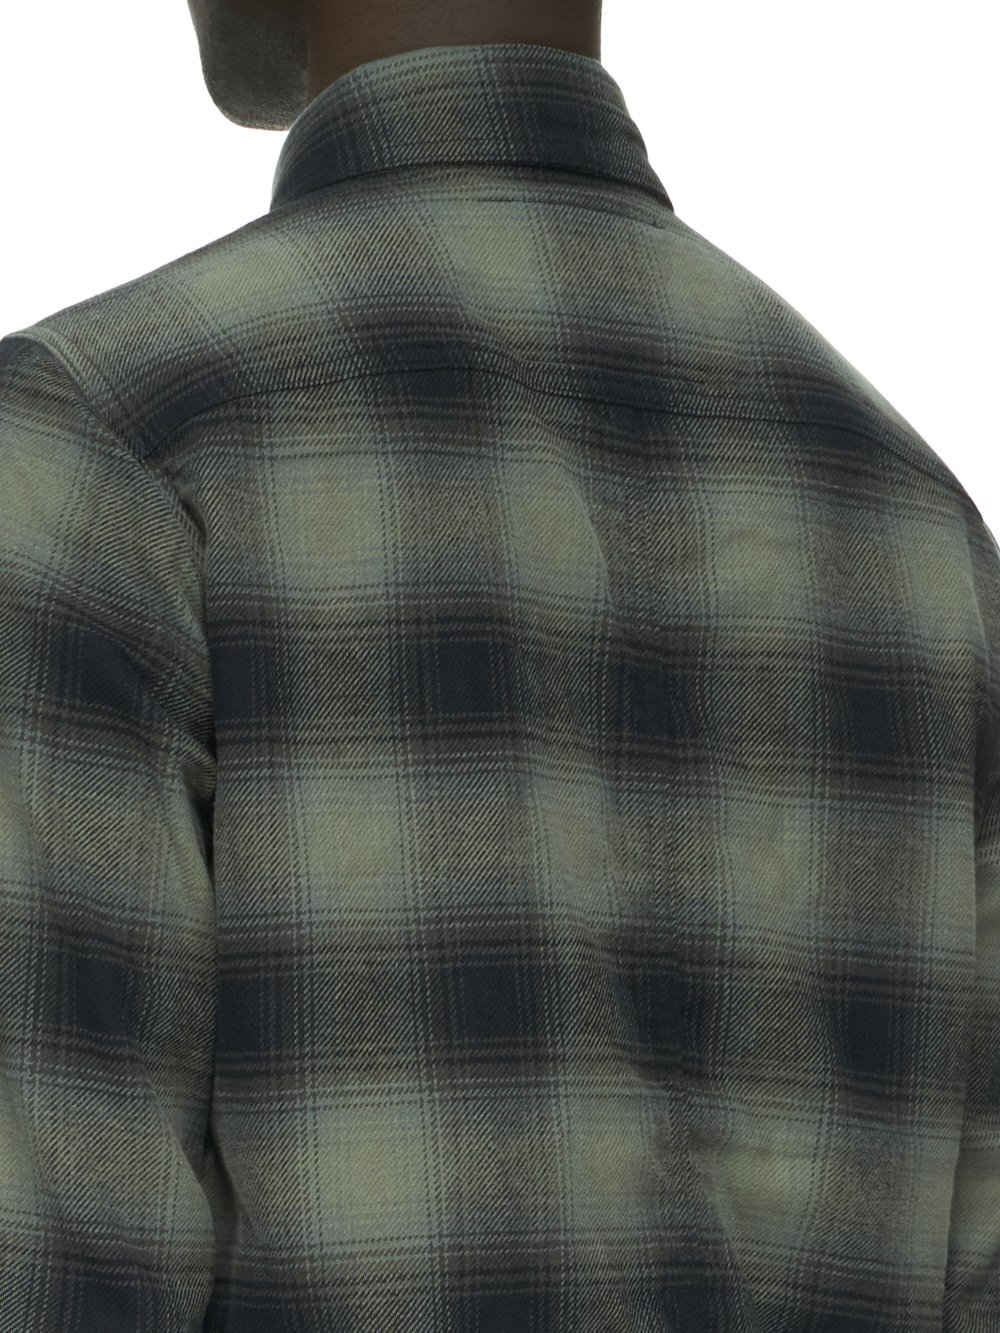 DRKSHDW FW23 LUXOR OUTERSHIRT IN BLACK OMBRE HEAVY COTTON PLAID